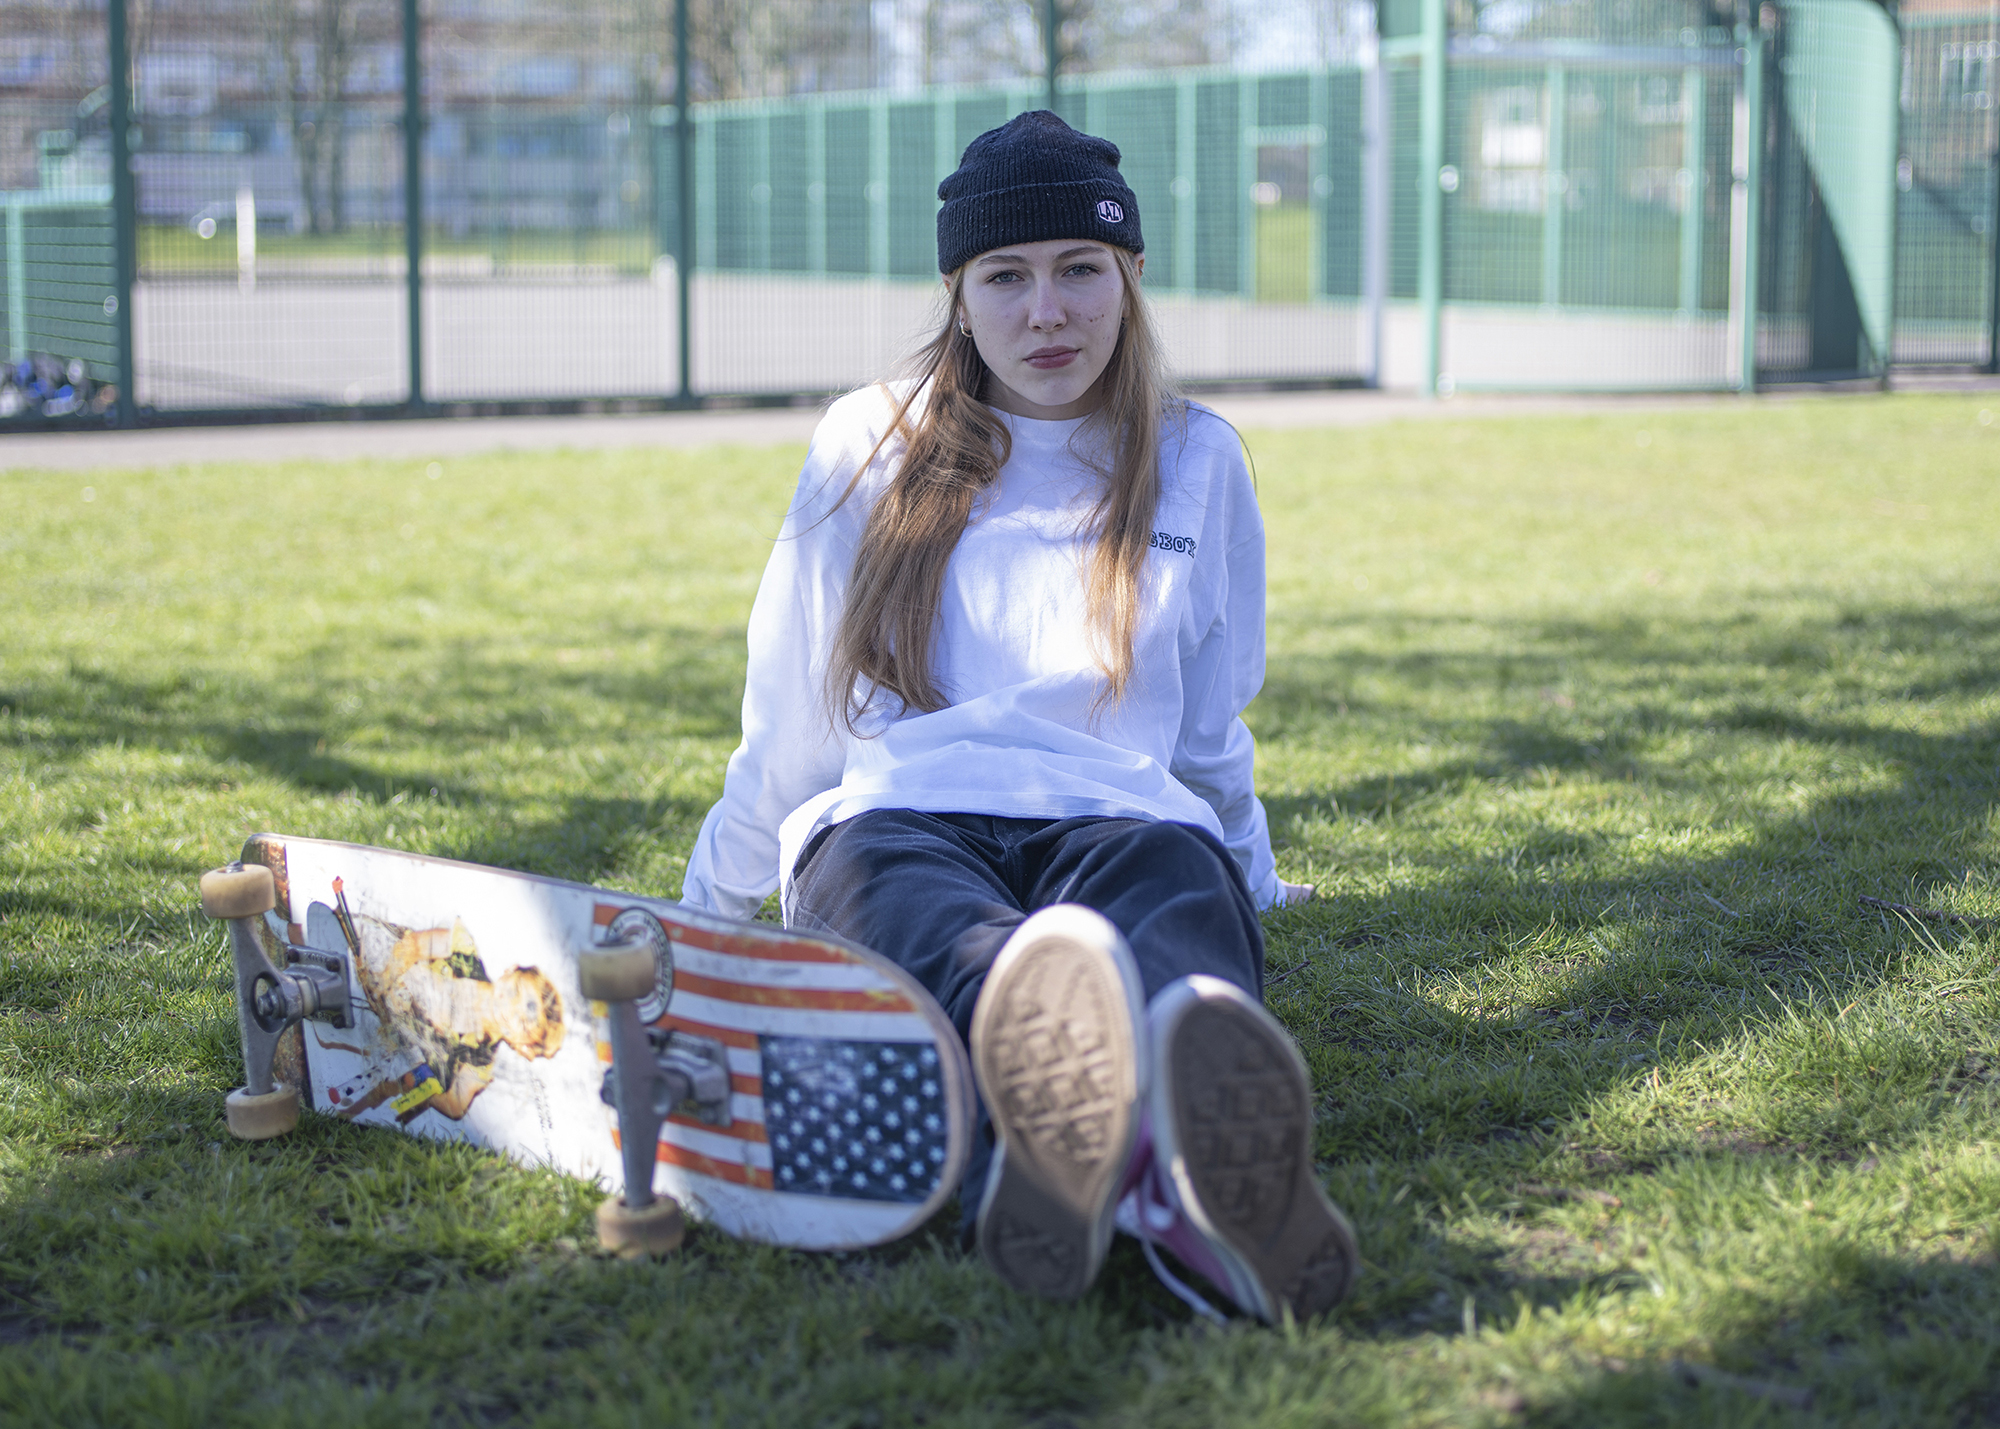 BA Photography work by Hannah Jayne showing a documentary style portrait of a skater girl sat in grass, legs outstretched next to her board.